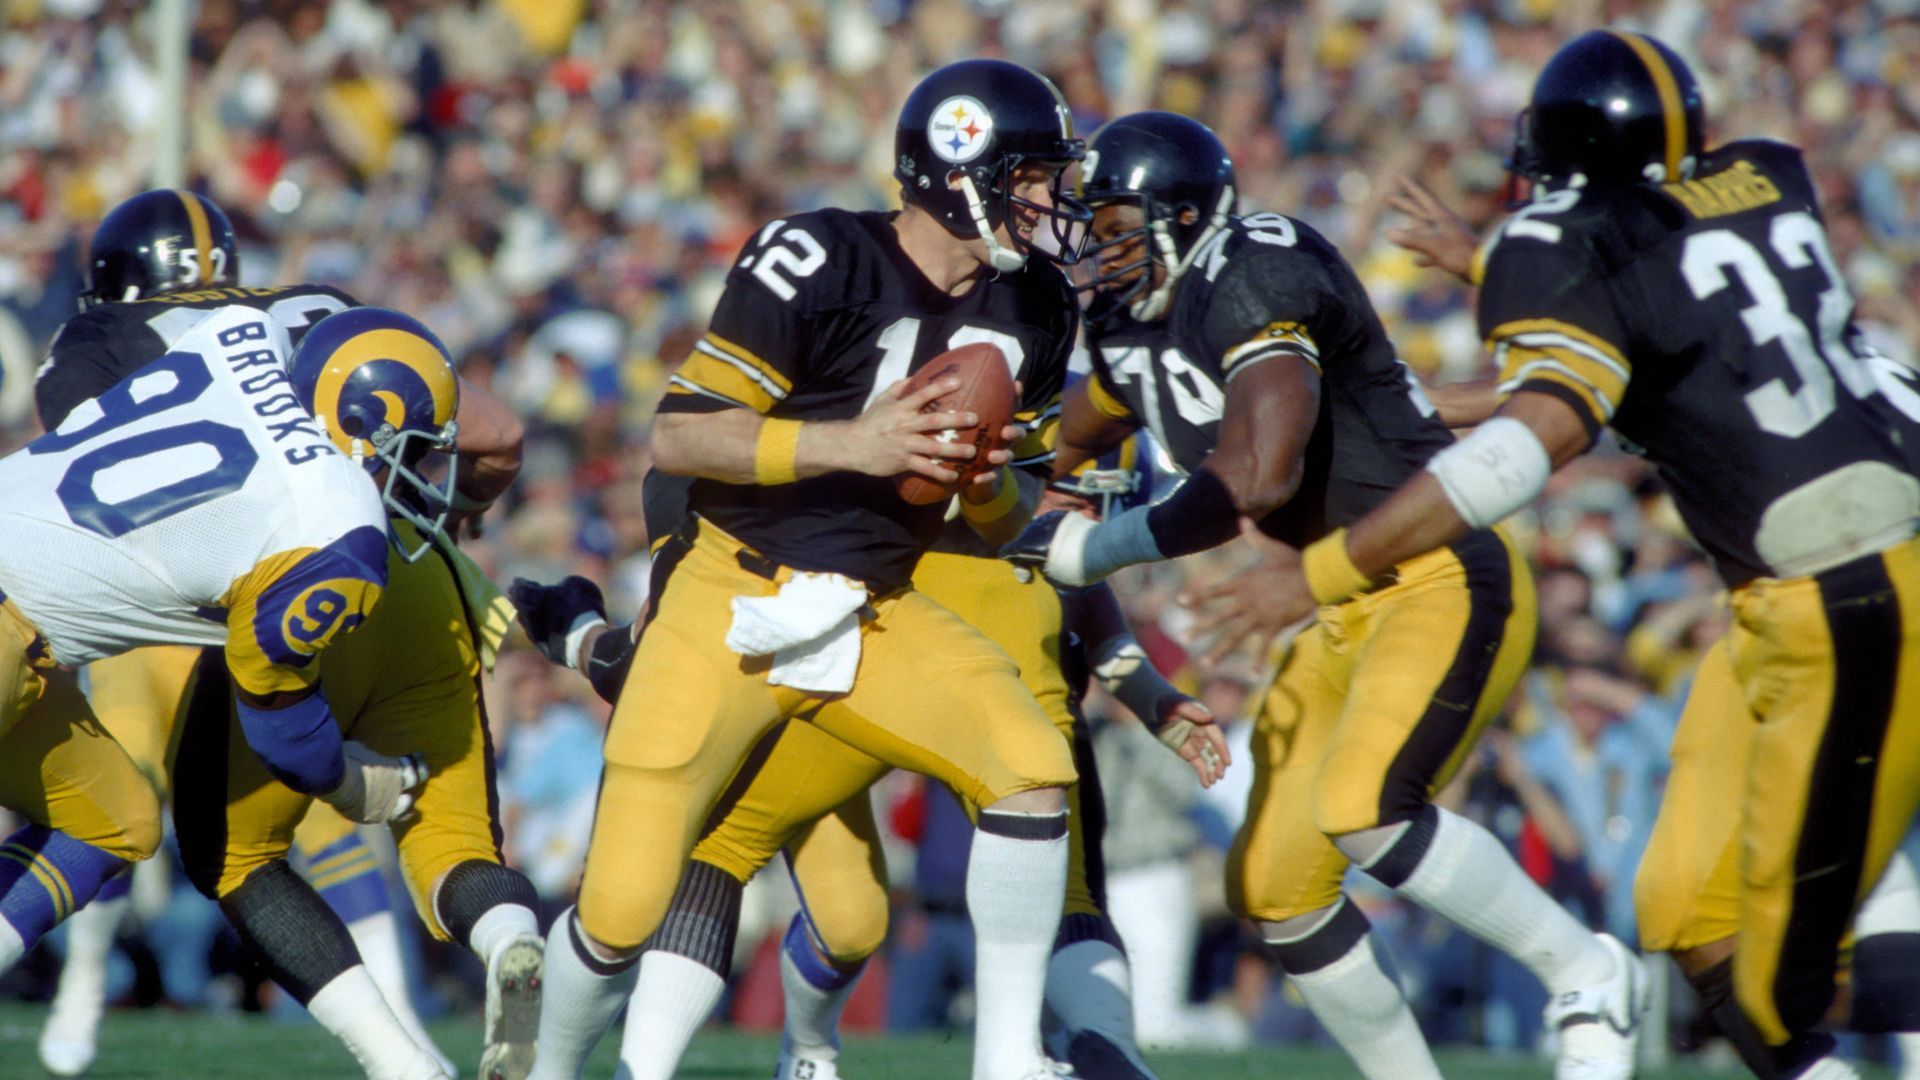 <strong>1980 - Pittsburgh Steelers</strong><br>Endstand: 31:19 gegen die Los Angeles Rams<br>Coach: Chuck Noll<br>MVP: Terry Bradshaw